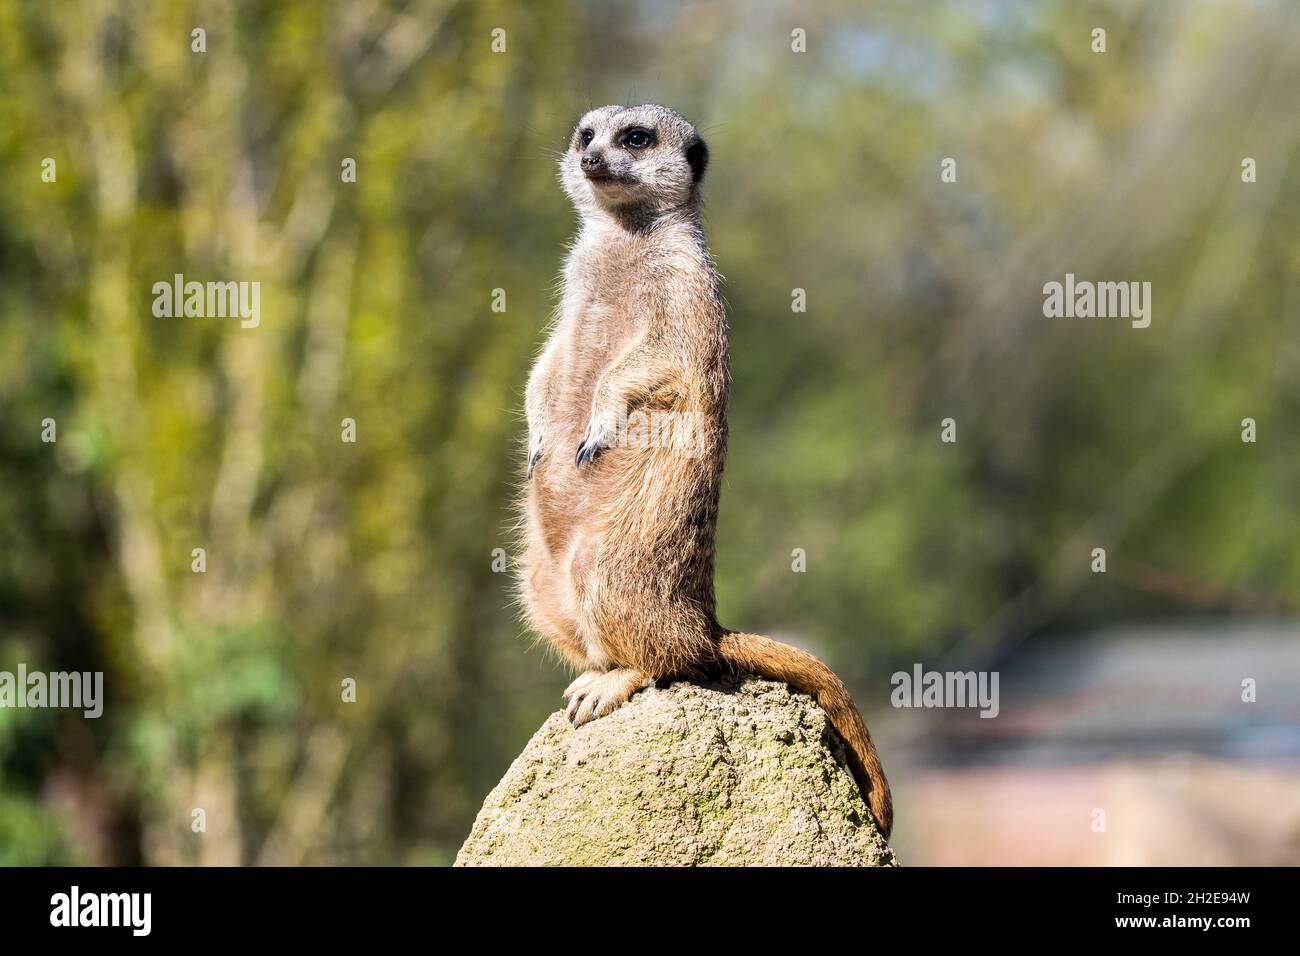 standing up suricate on a stone looking alert for danger Stock Photo